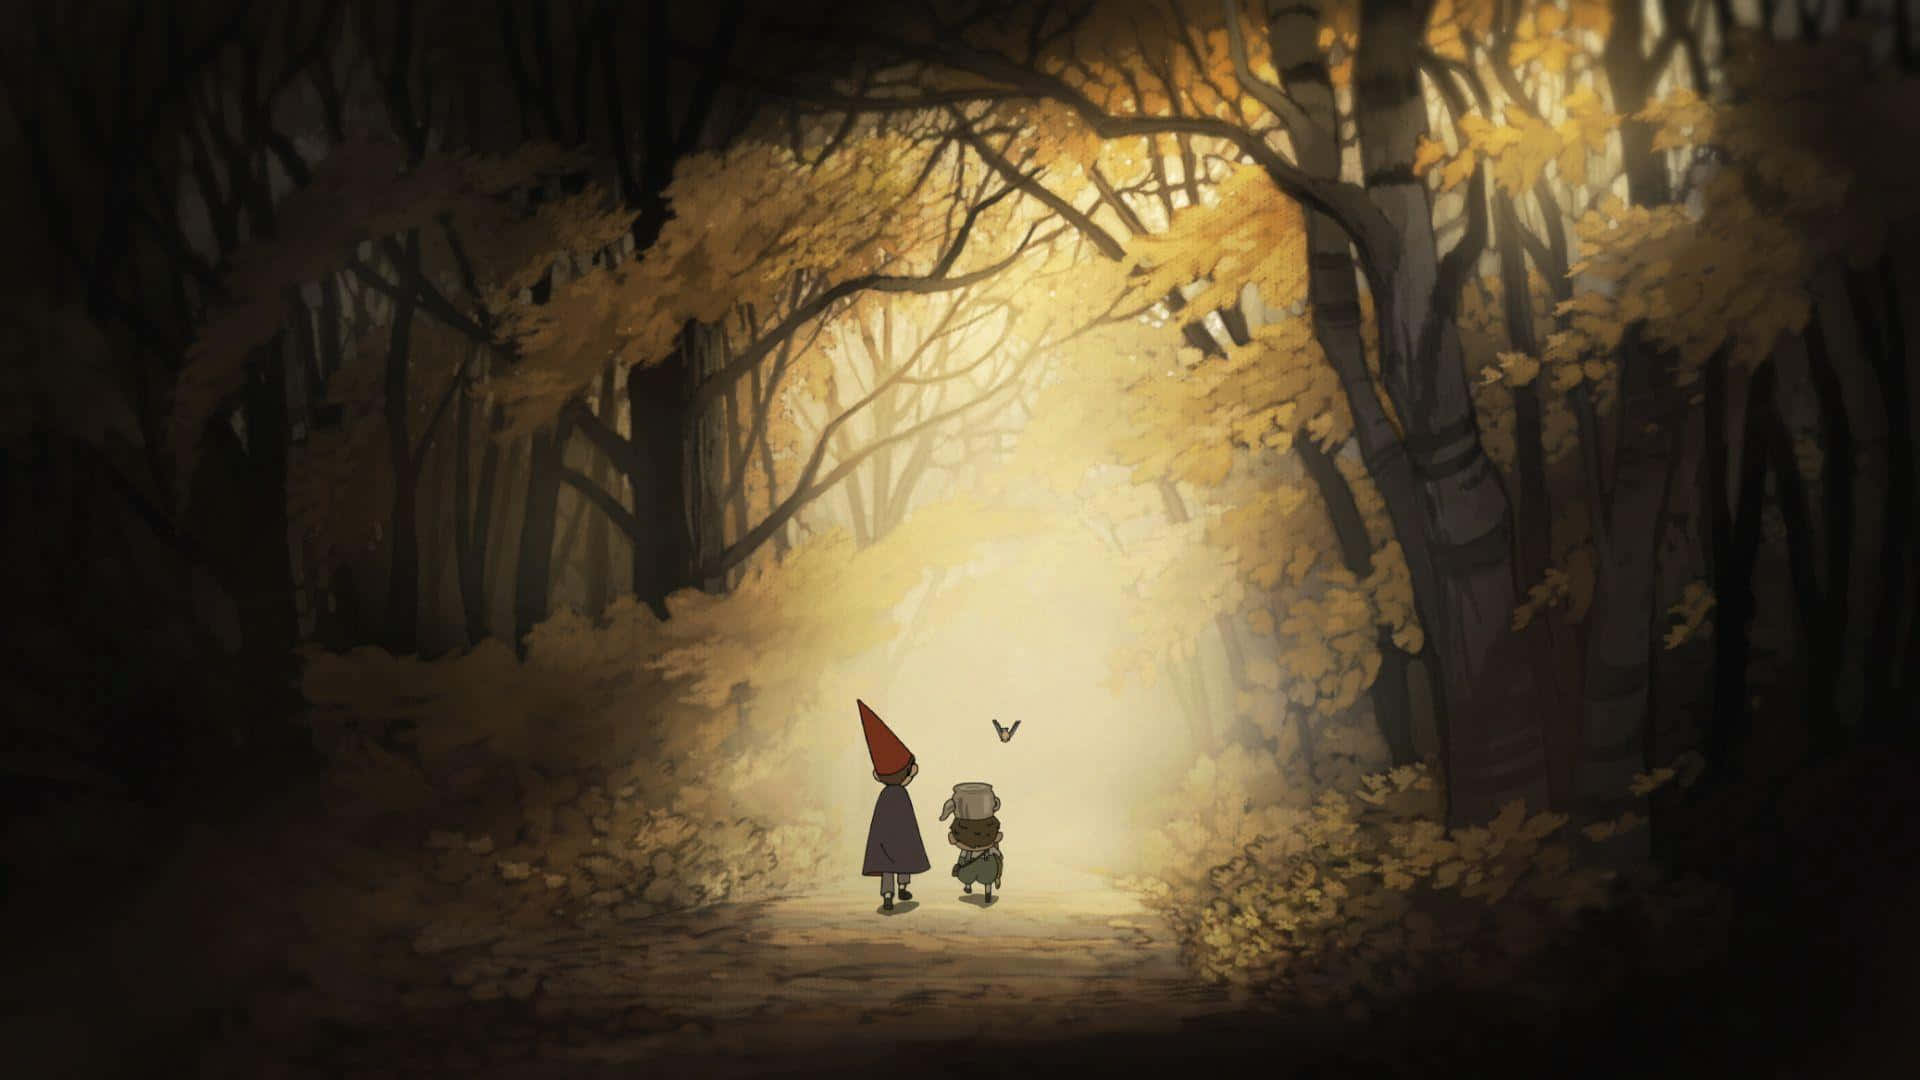 Wirt and Beatrice's Adventure Through the Unknown